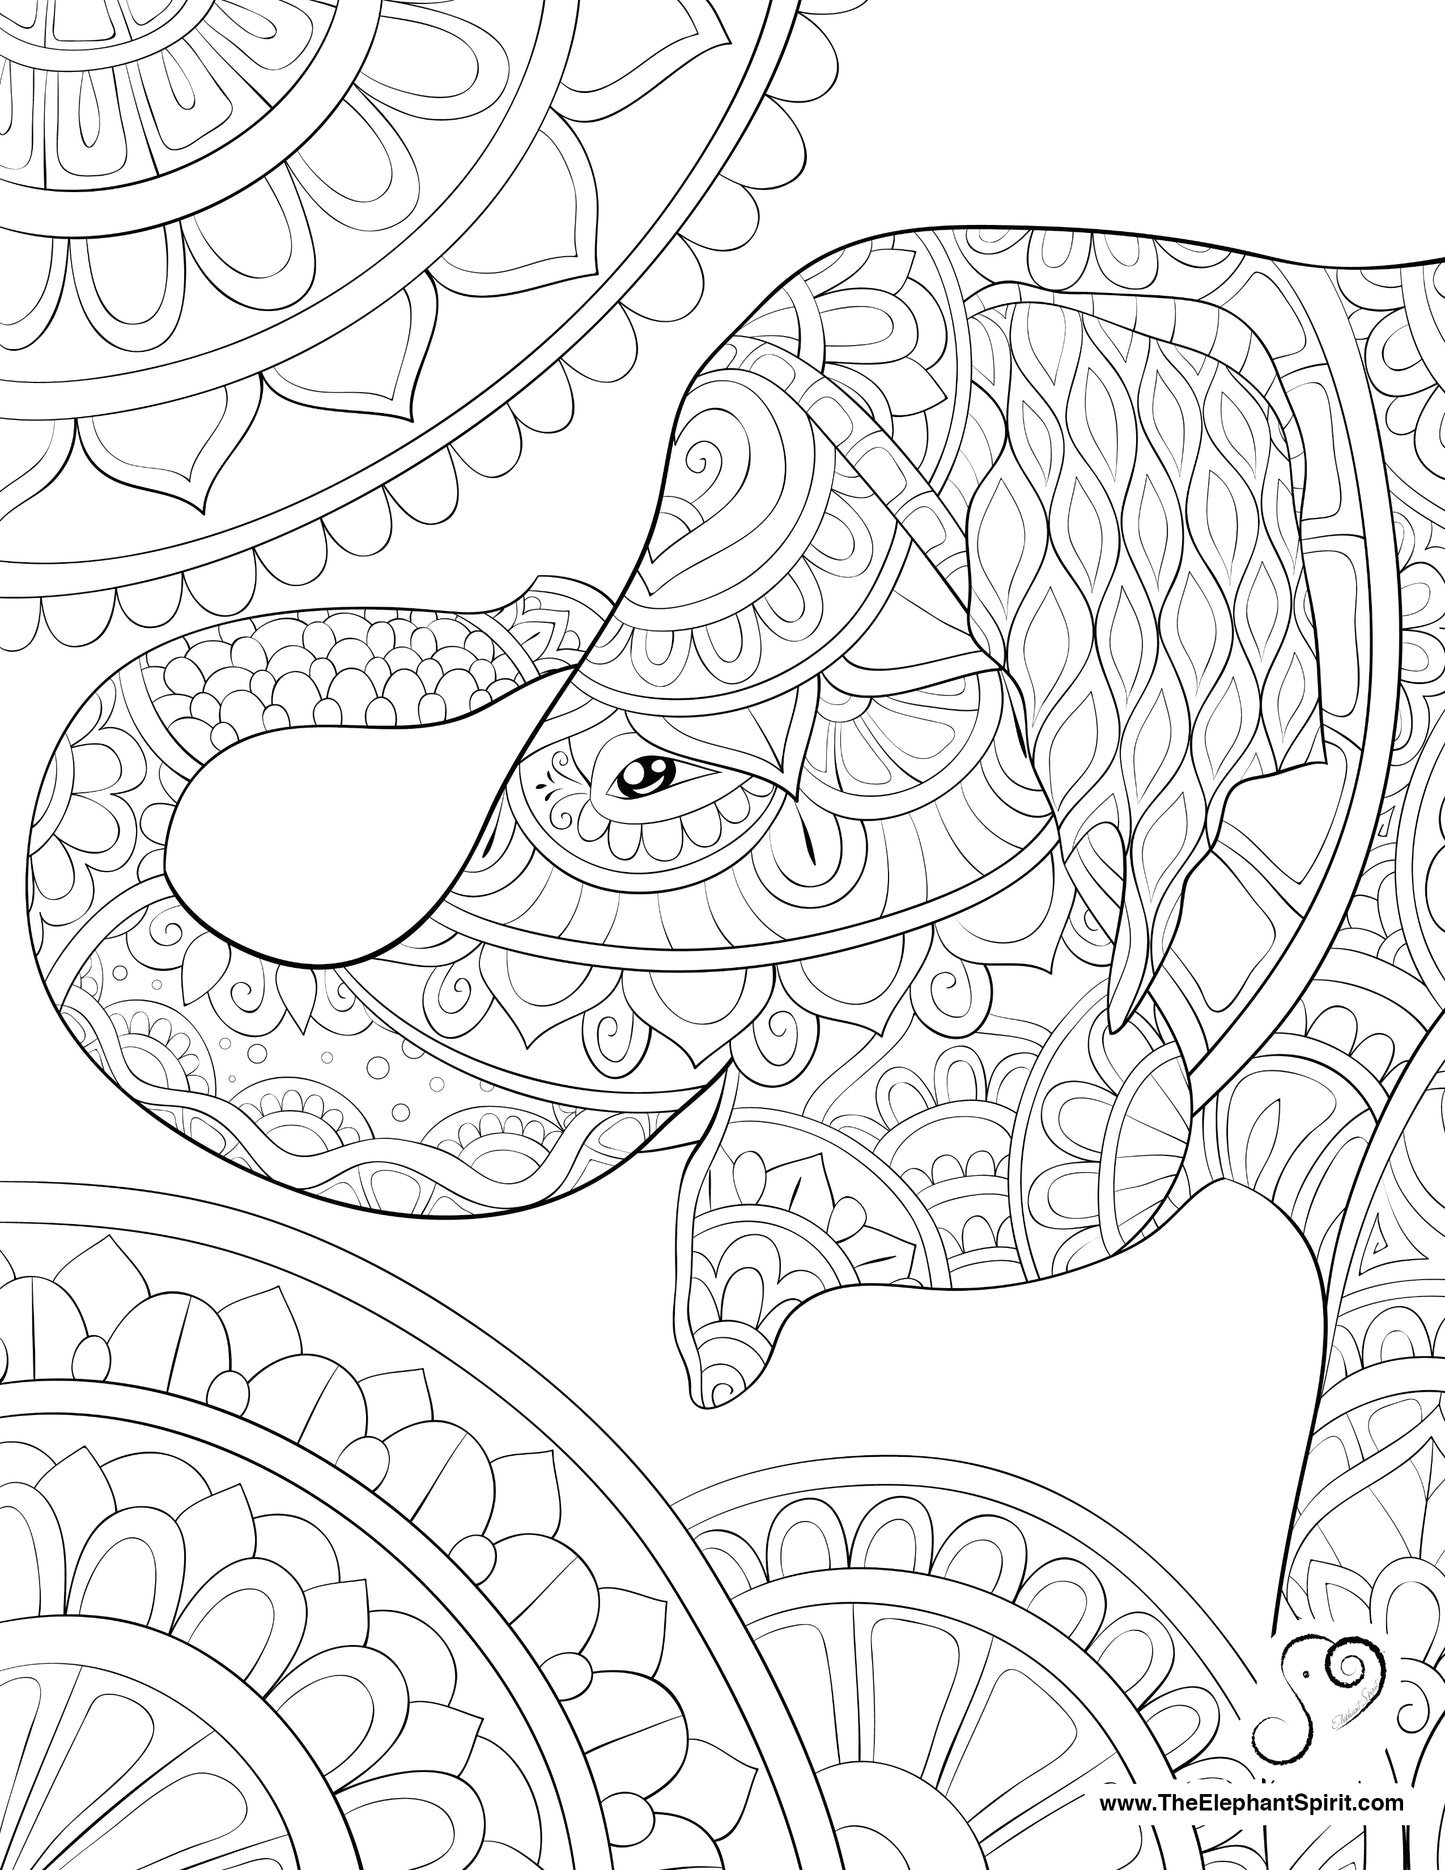 FREE Coloring Page 08-04